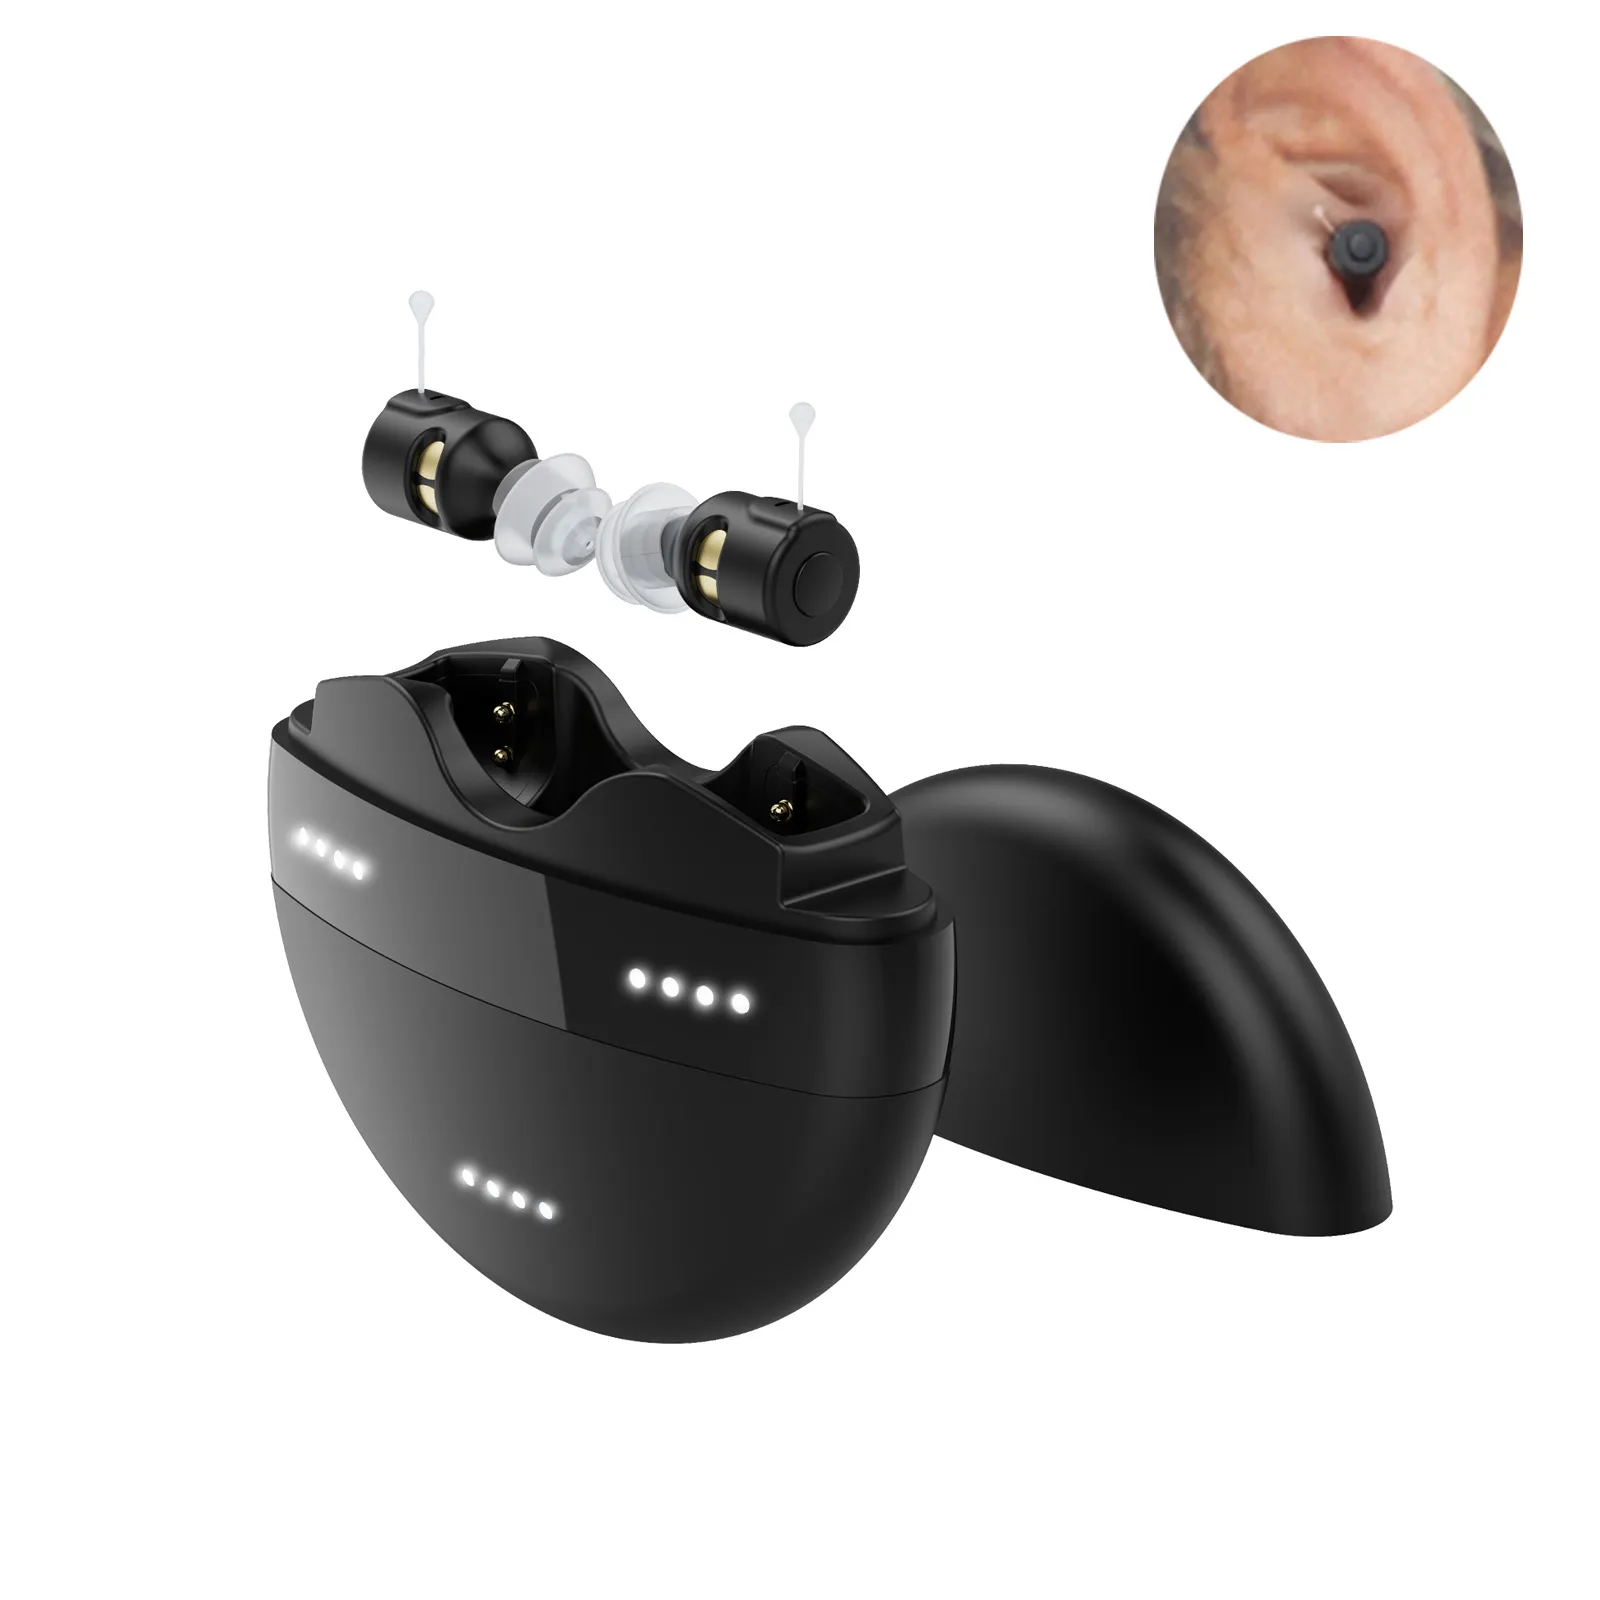 2023 new product trends pocket medical cic hearing aids mini invisible rechargeable digital hearing aid device for seniors